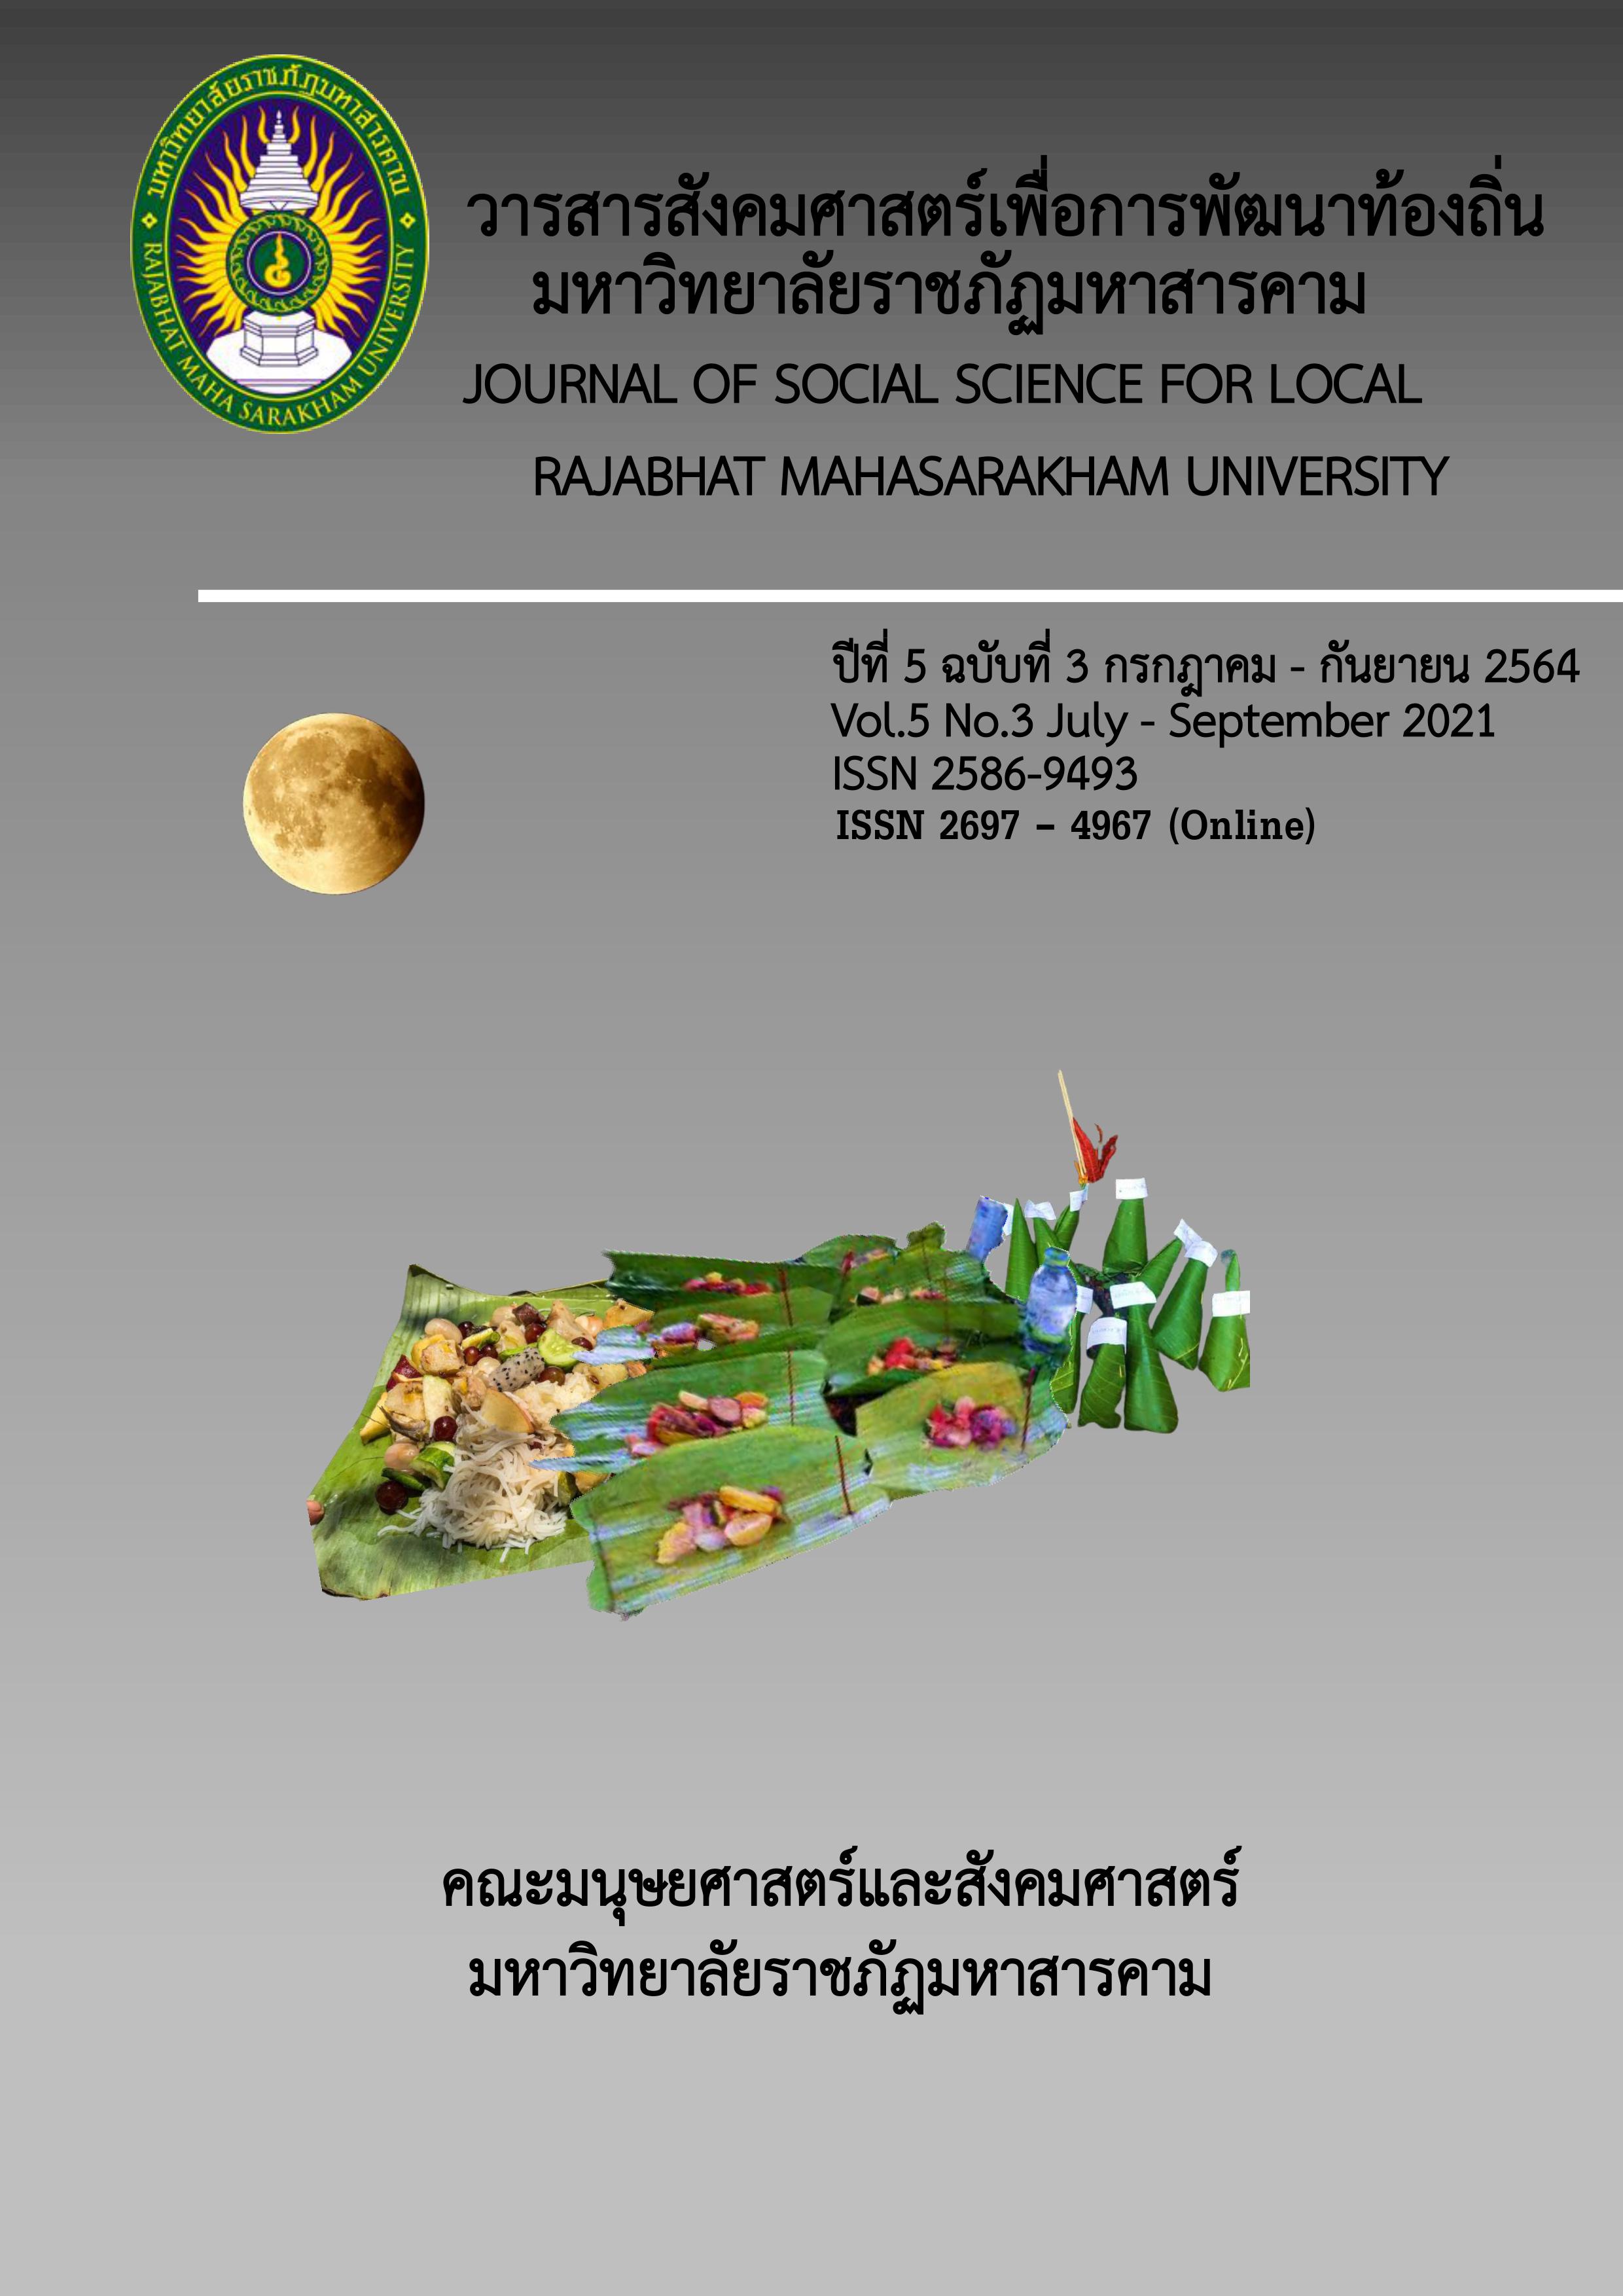 					View Vol. 5 No. 3 (2021): JOURNAL OF SOCIAL SCIENCE FOR LOCAL RAJABHAT MAHASARAKHAM UNIVERSITY
				